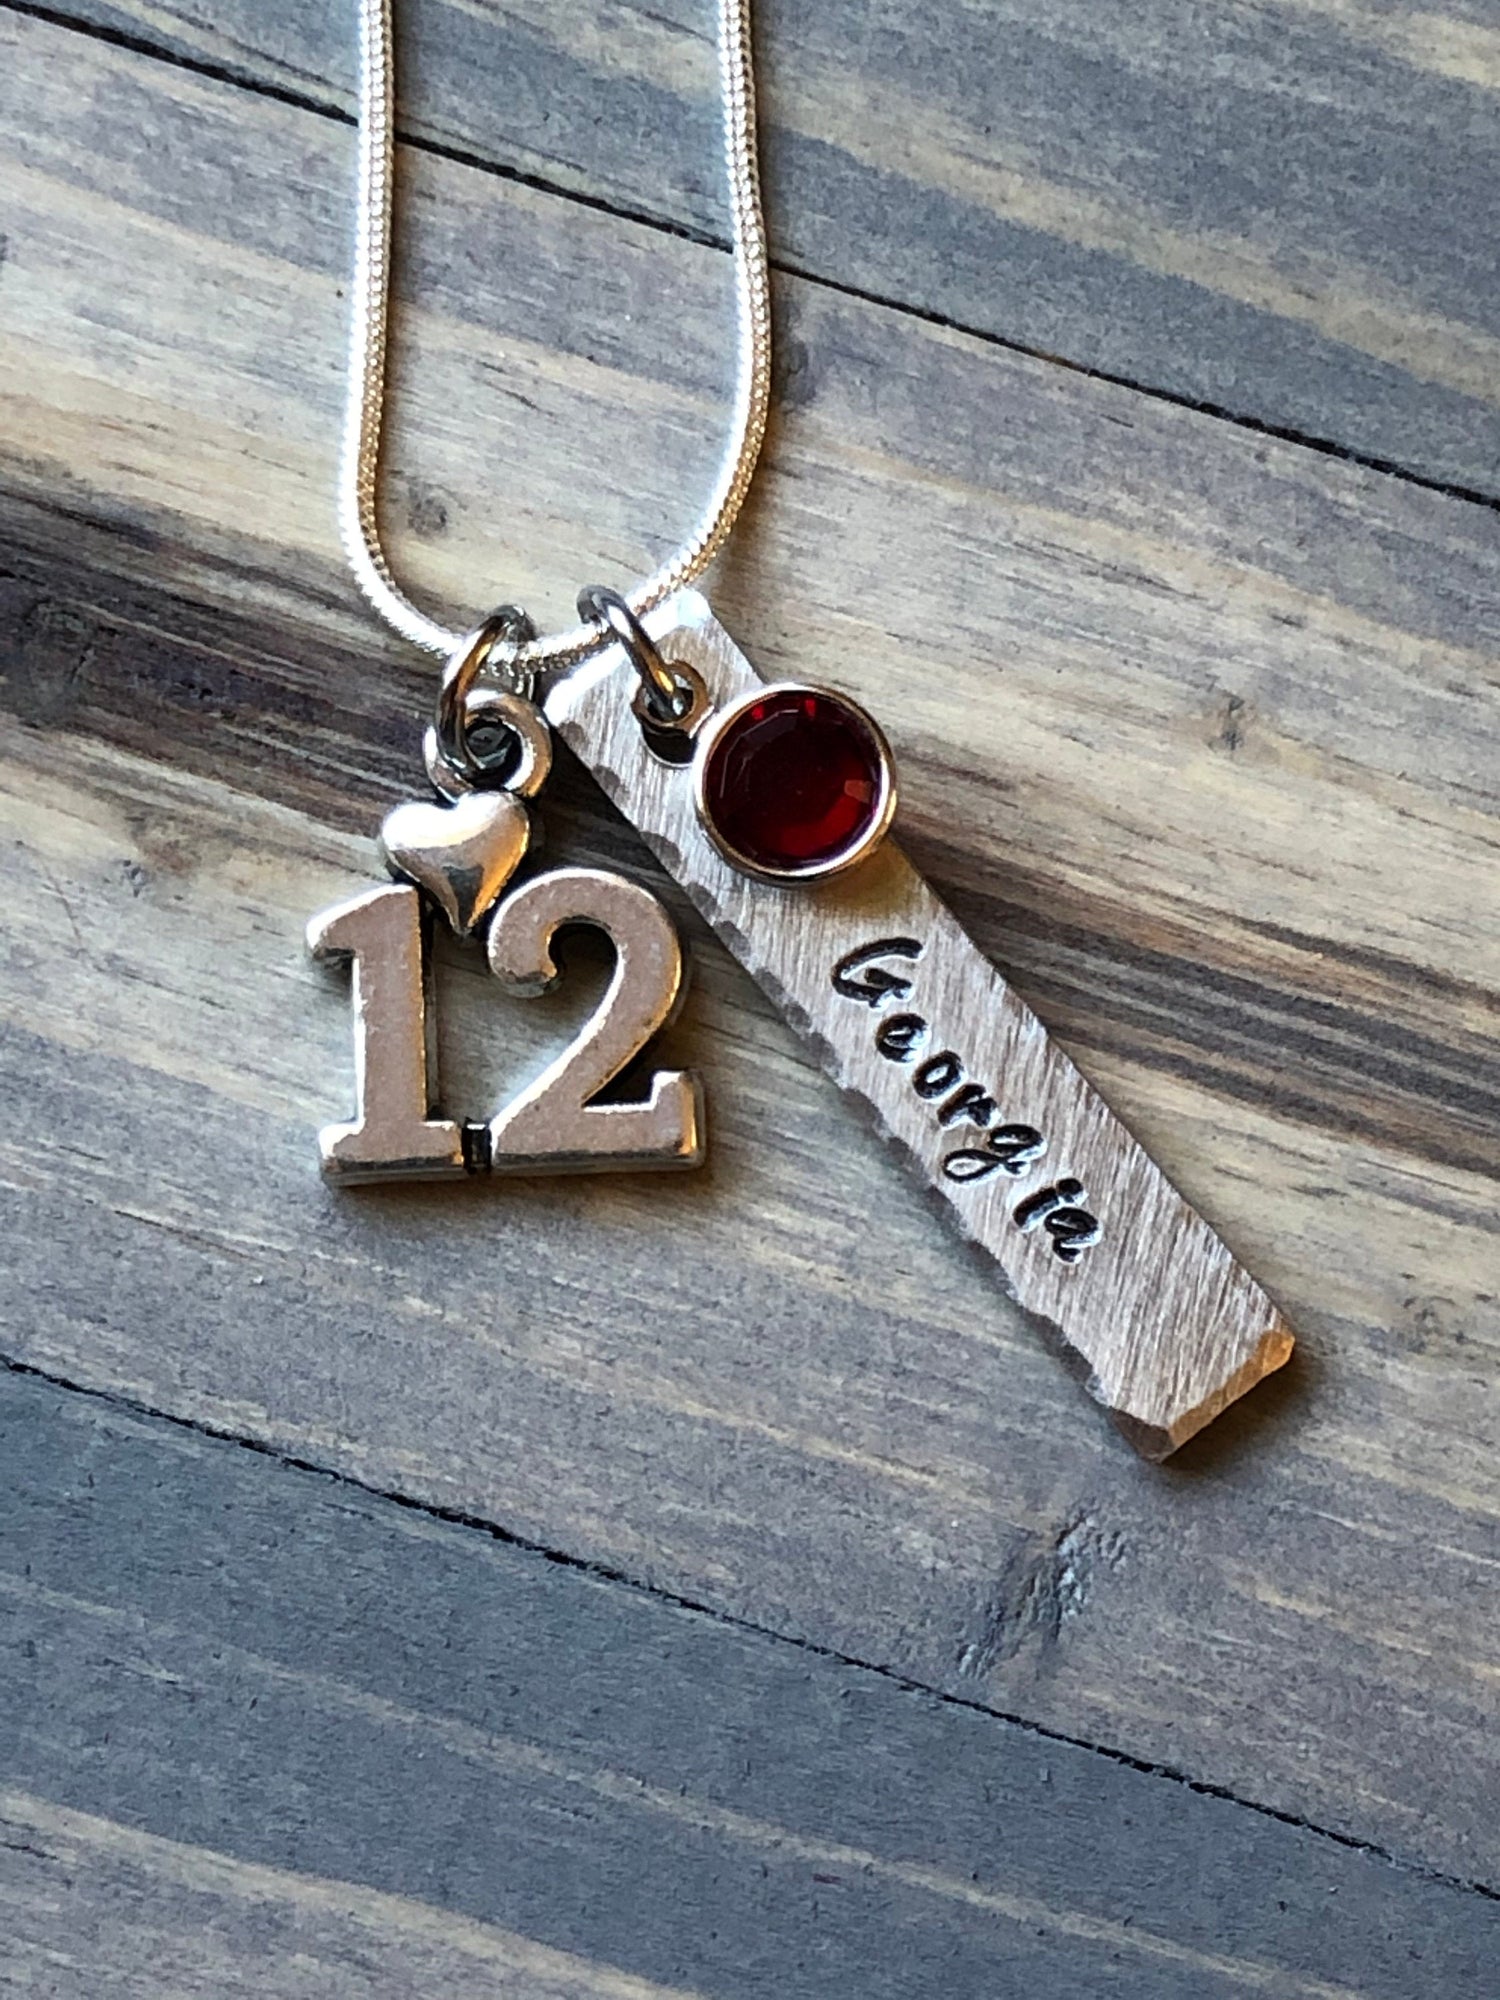 12th Birthday Necklace, Gift for Girl, Personalized Necklace, Birthstone Necklace, Gift for Girl&#39;s 12th birday, Turning 12, Add a Charm